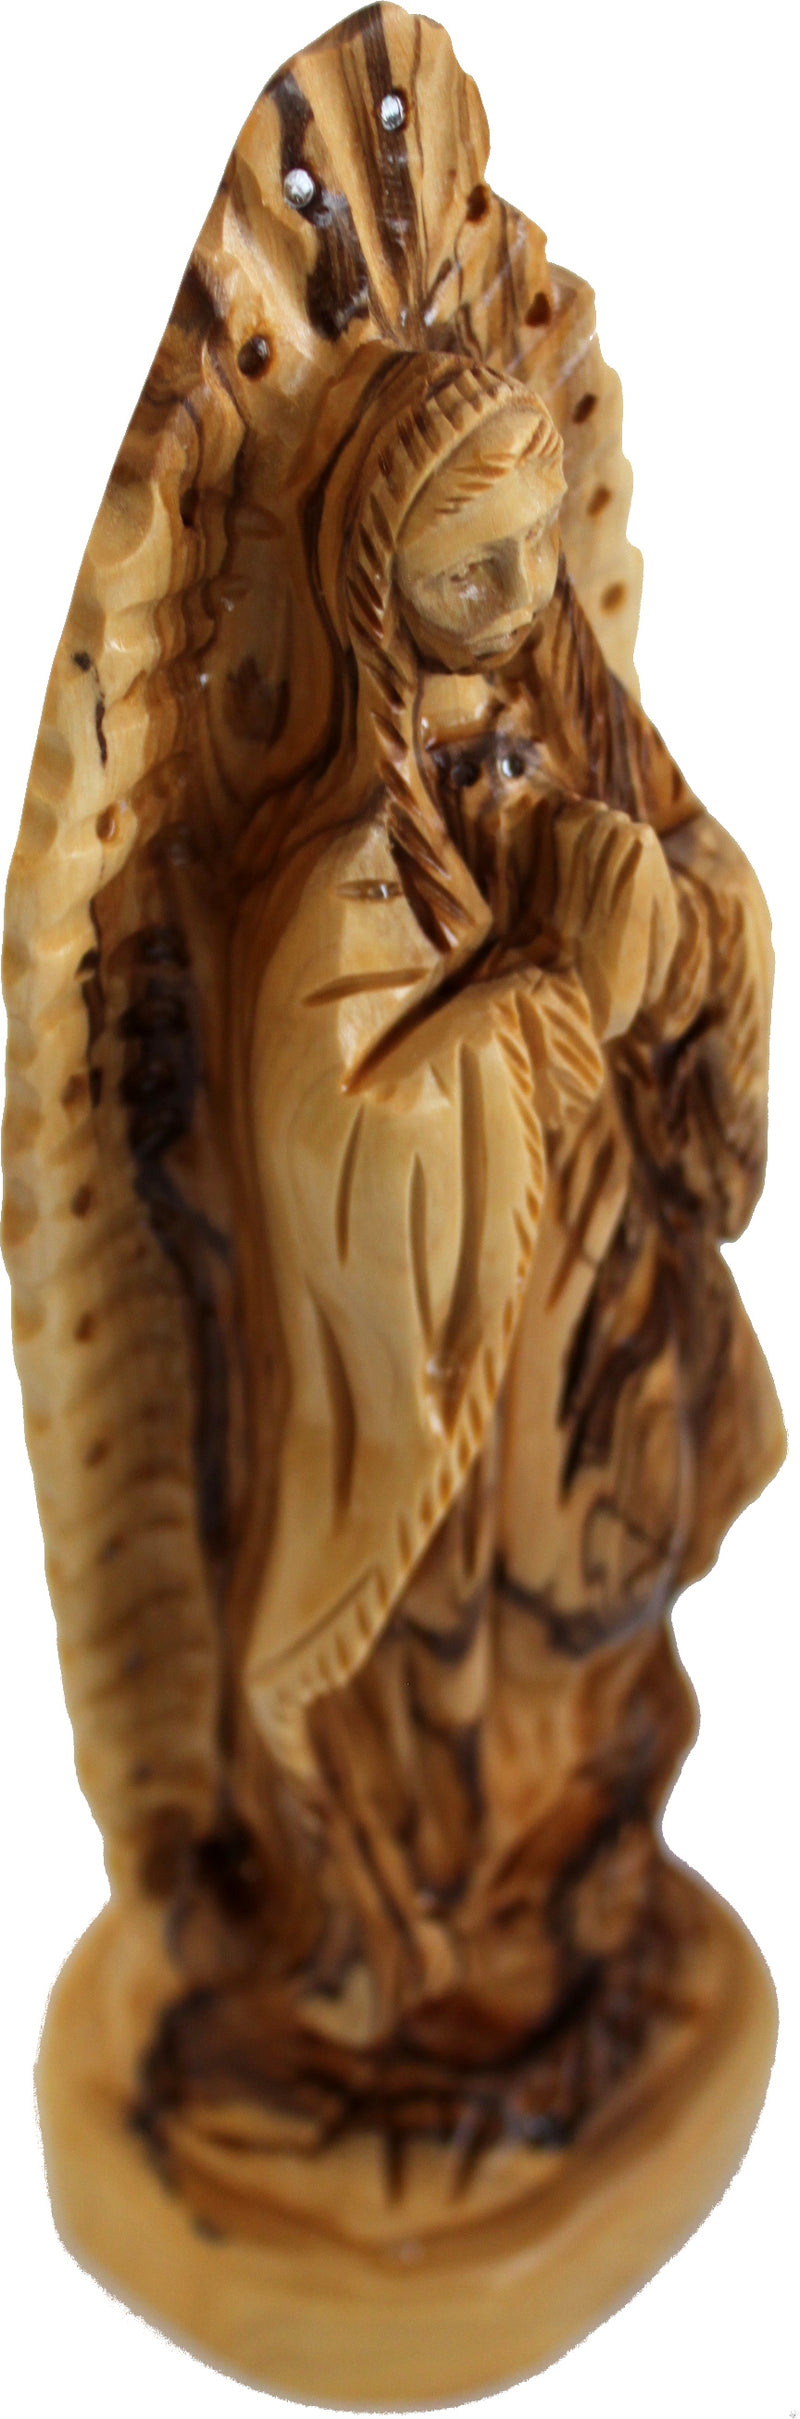 Holy Land Market Virgin or Lady of Guadalupe Olive Wood Statue from Bethlehem - (24 cm cm or 9.25 inches)